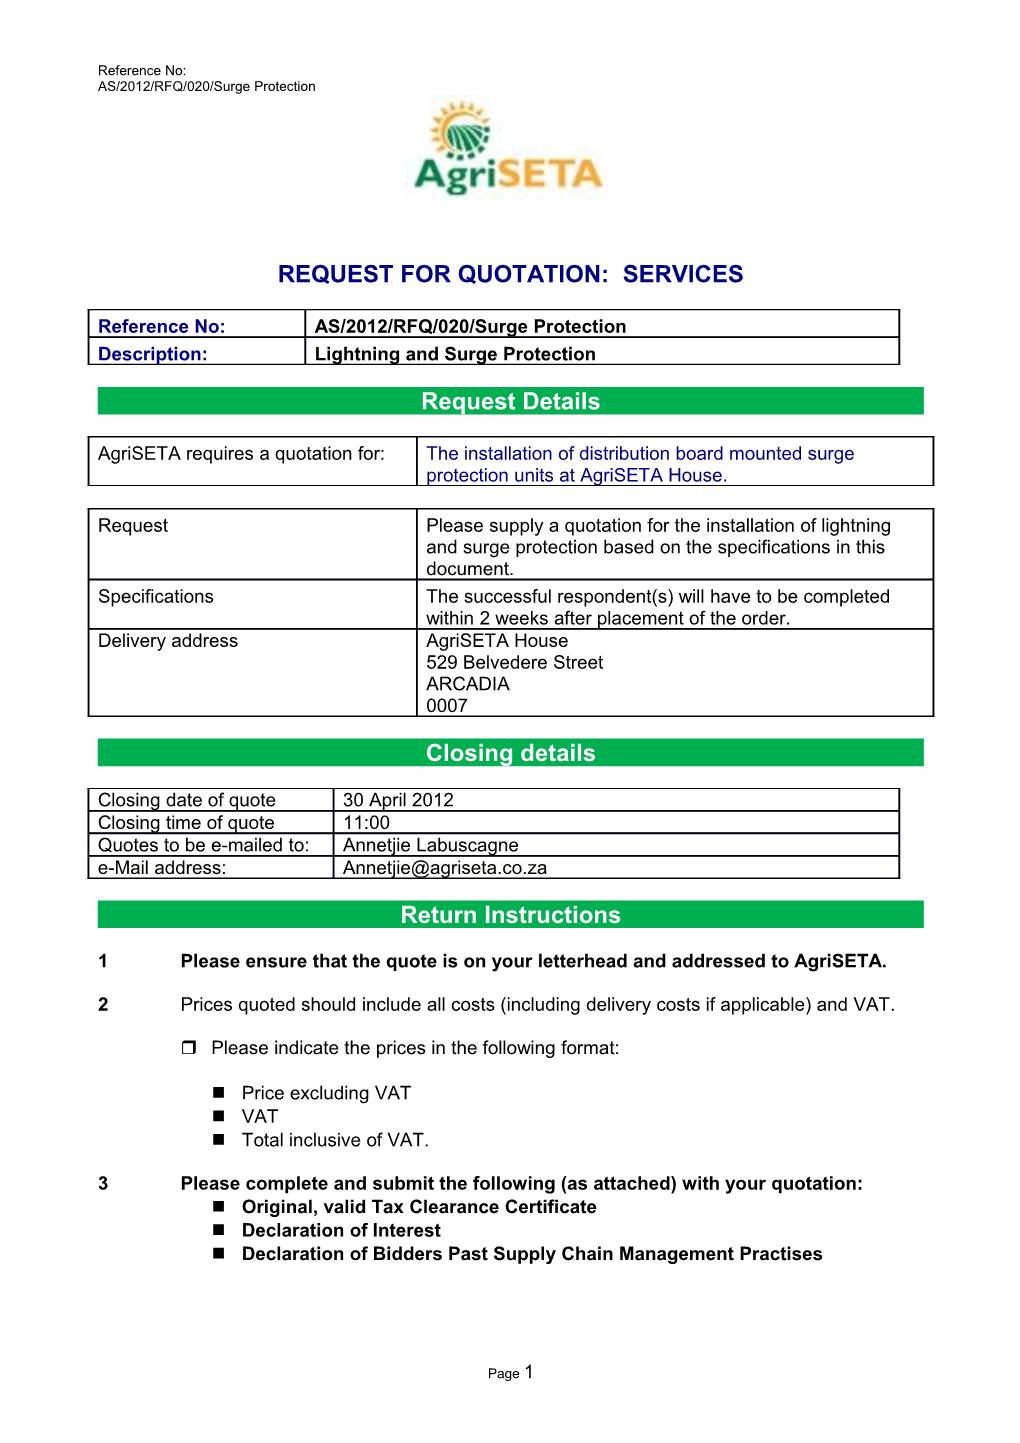 Request for Quotation: Services